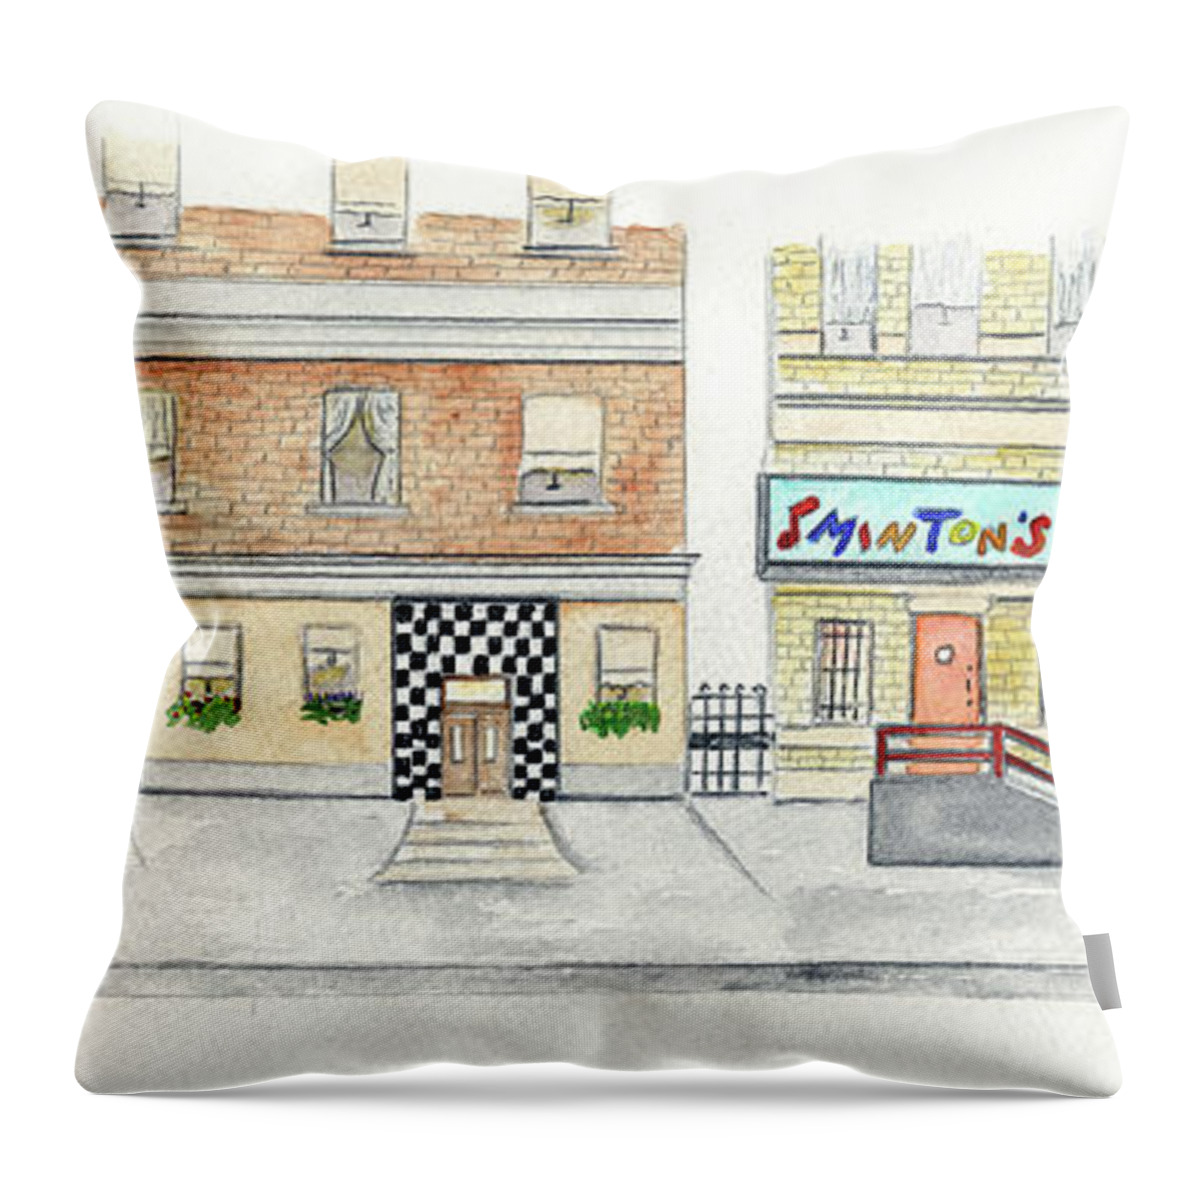 Minton's Throw Pillow featuring the painting Minton's Jazz Club on 118th Street in Harlem by Afinelyne